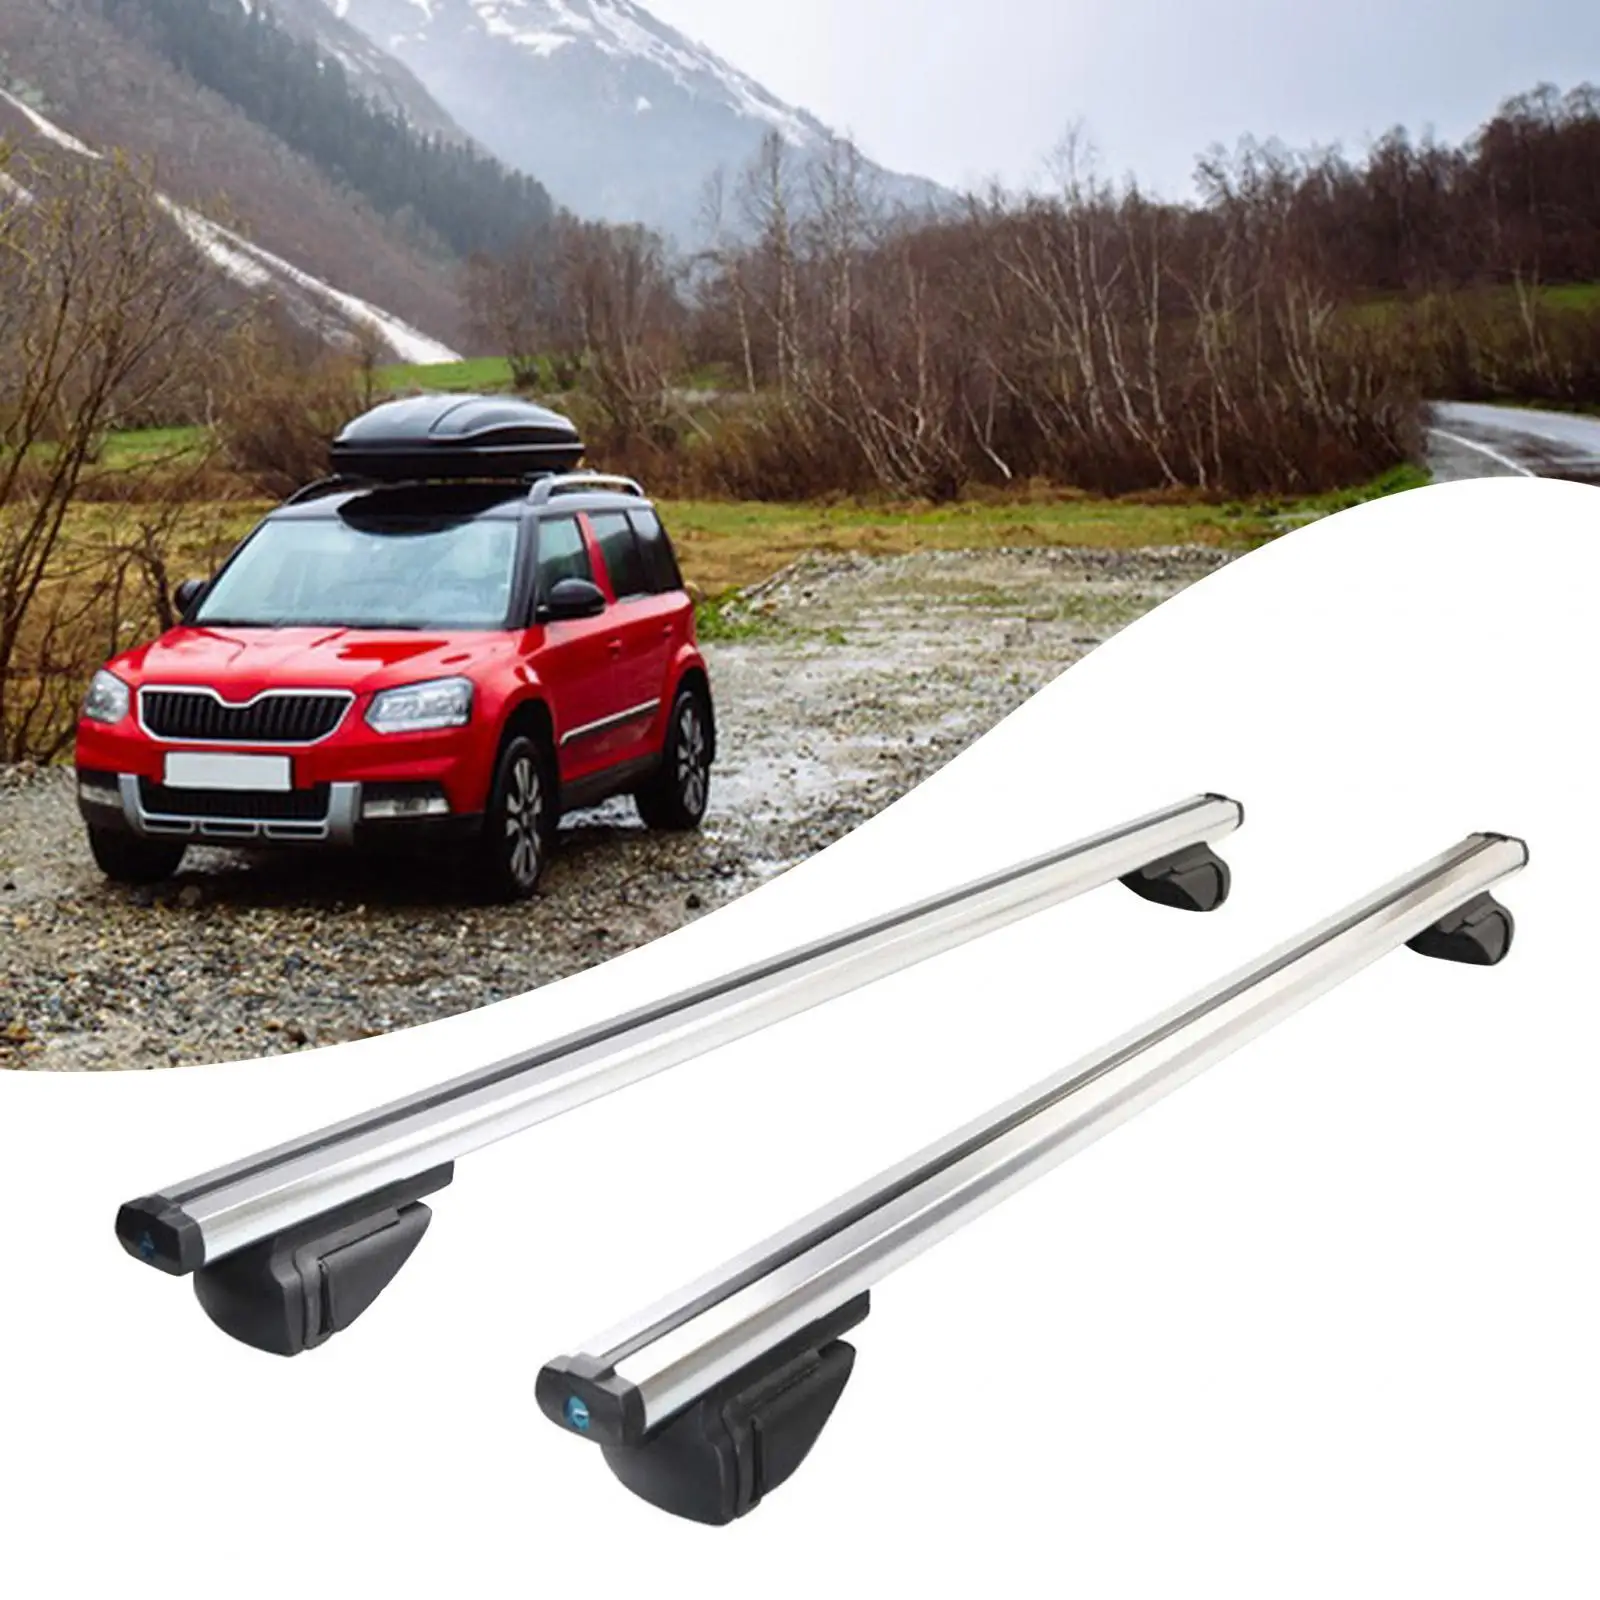 Roof Rack Cross Bars Cargo Bars Roof Rail Top Roof Rack Luggage Carrier Rail Universal Top Roof Crossbar Holder for Vehicle